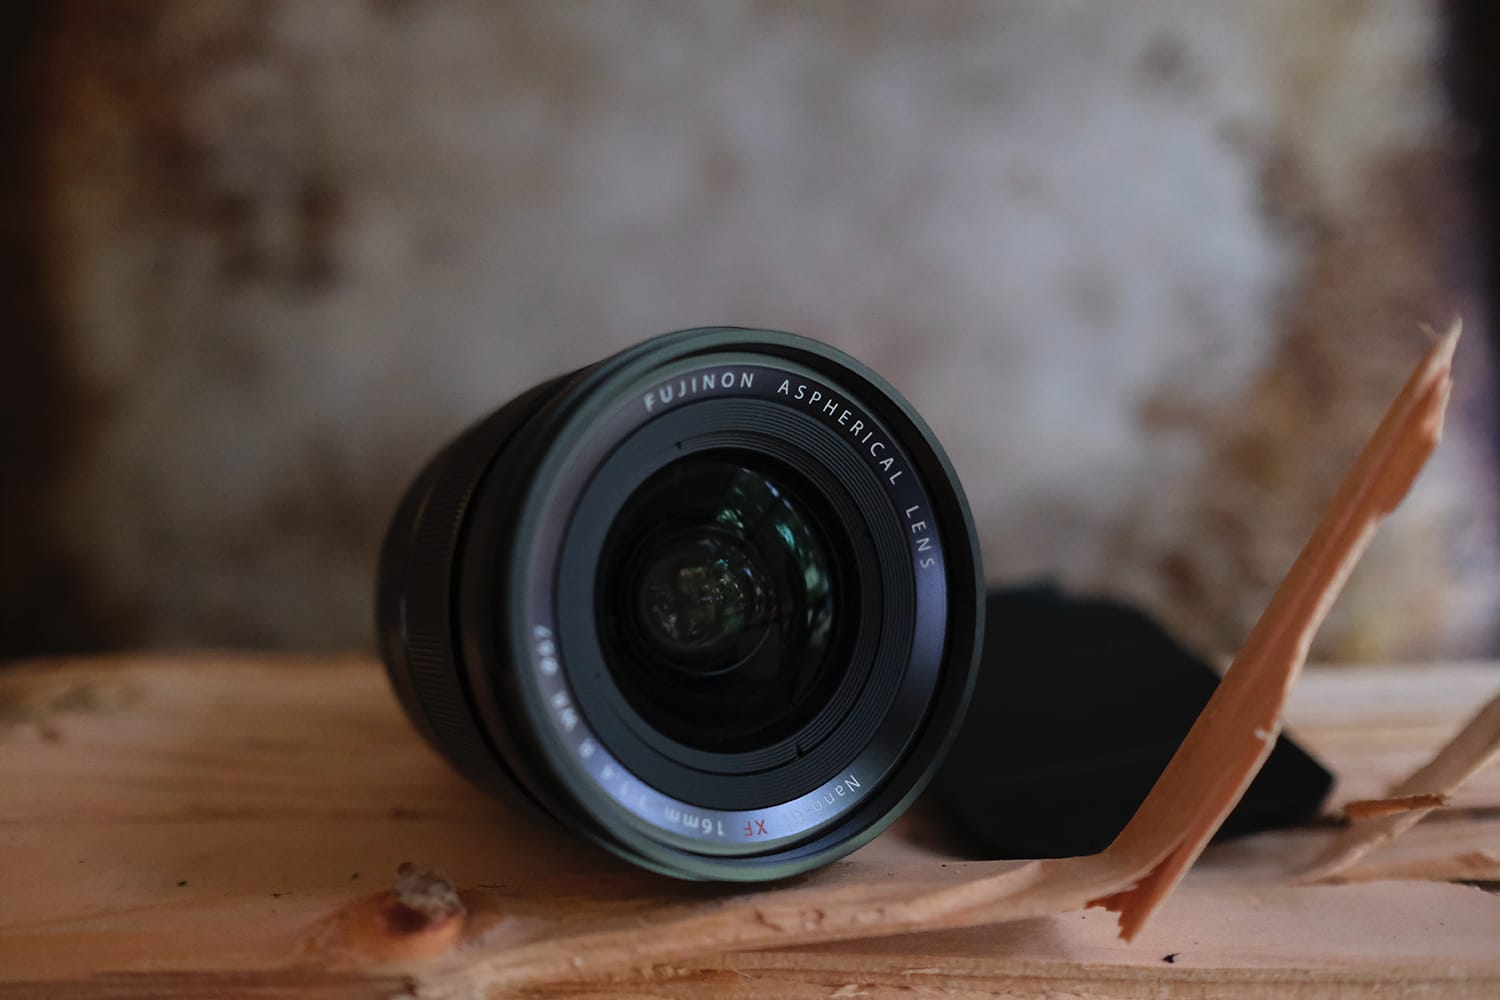 Prime Lenses: 6 Amazing Focal Lengths Every Photographer Should Have